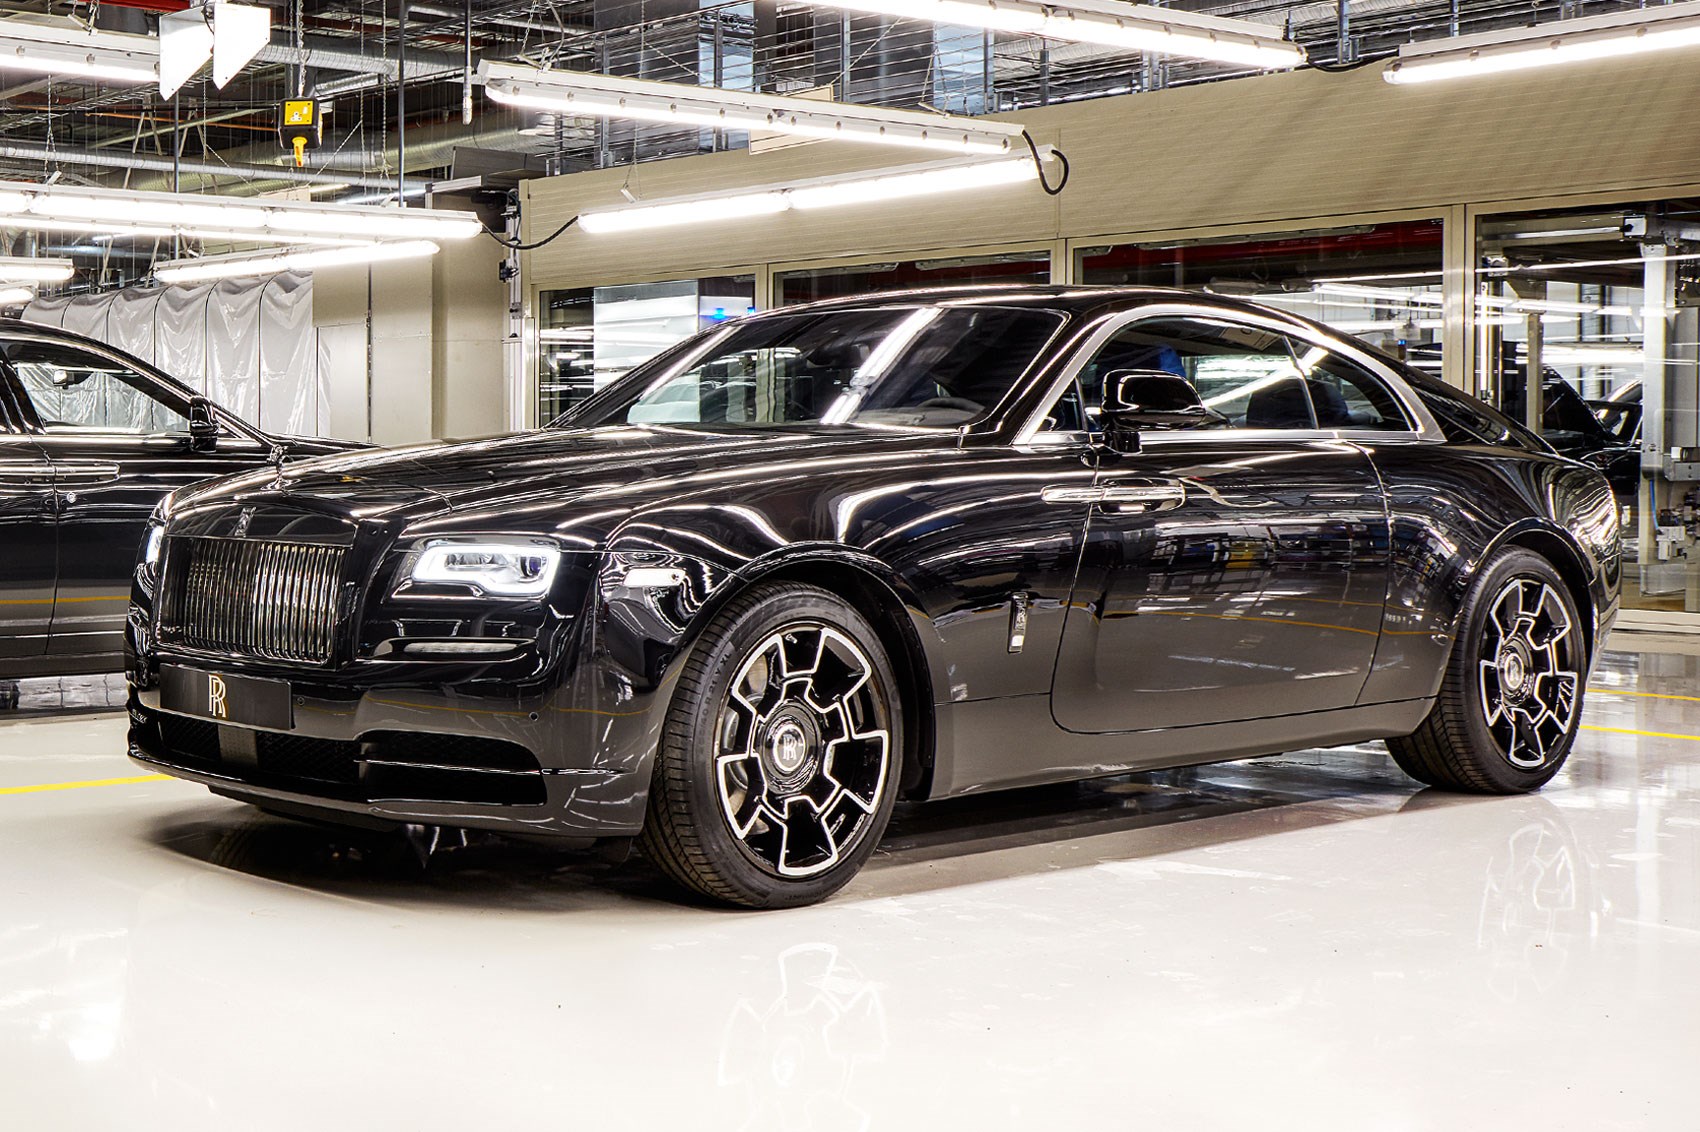 Rolls Royce has just launched the worlds most luxurious electric vehicle  and heres how many Crores it is worth  GQ India